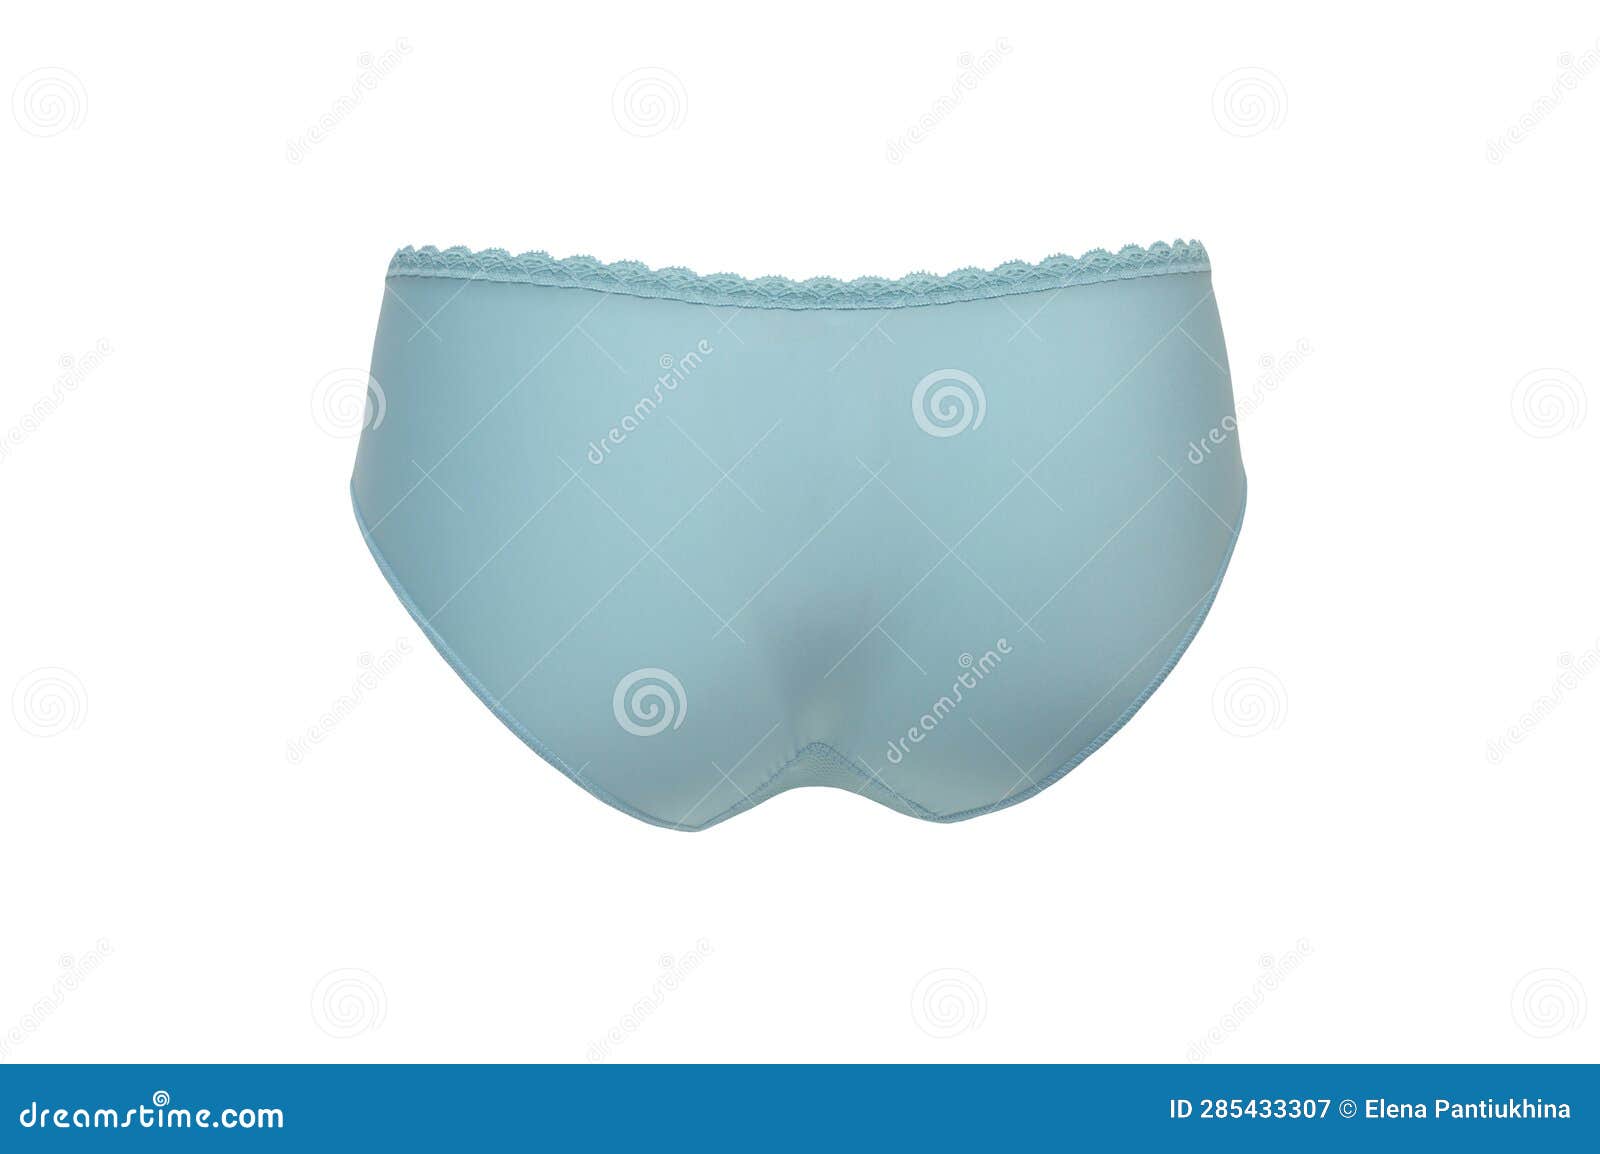 Lingerie Women S Lacy Turquoise Or Blue Panties Isolated On A White